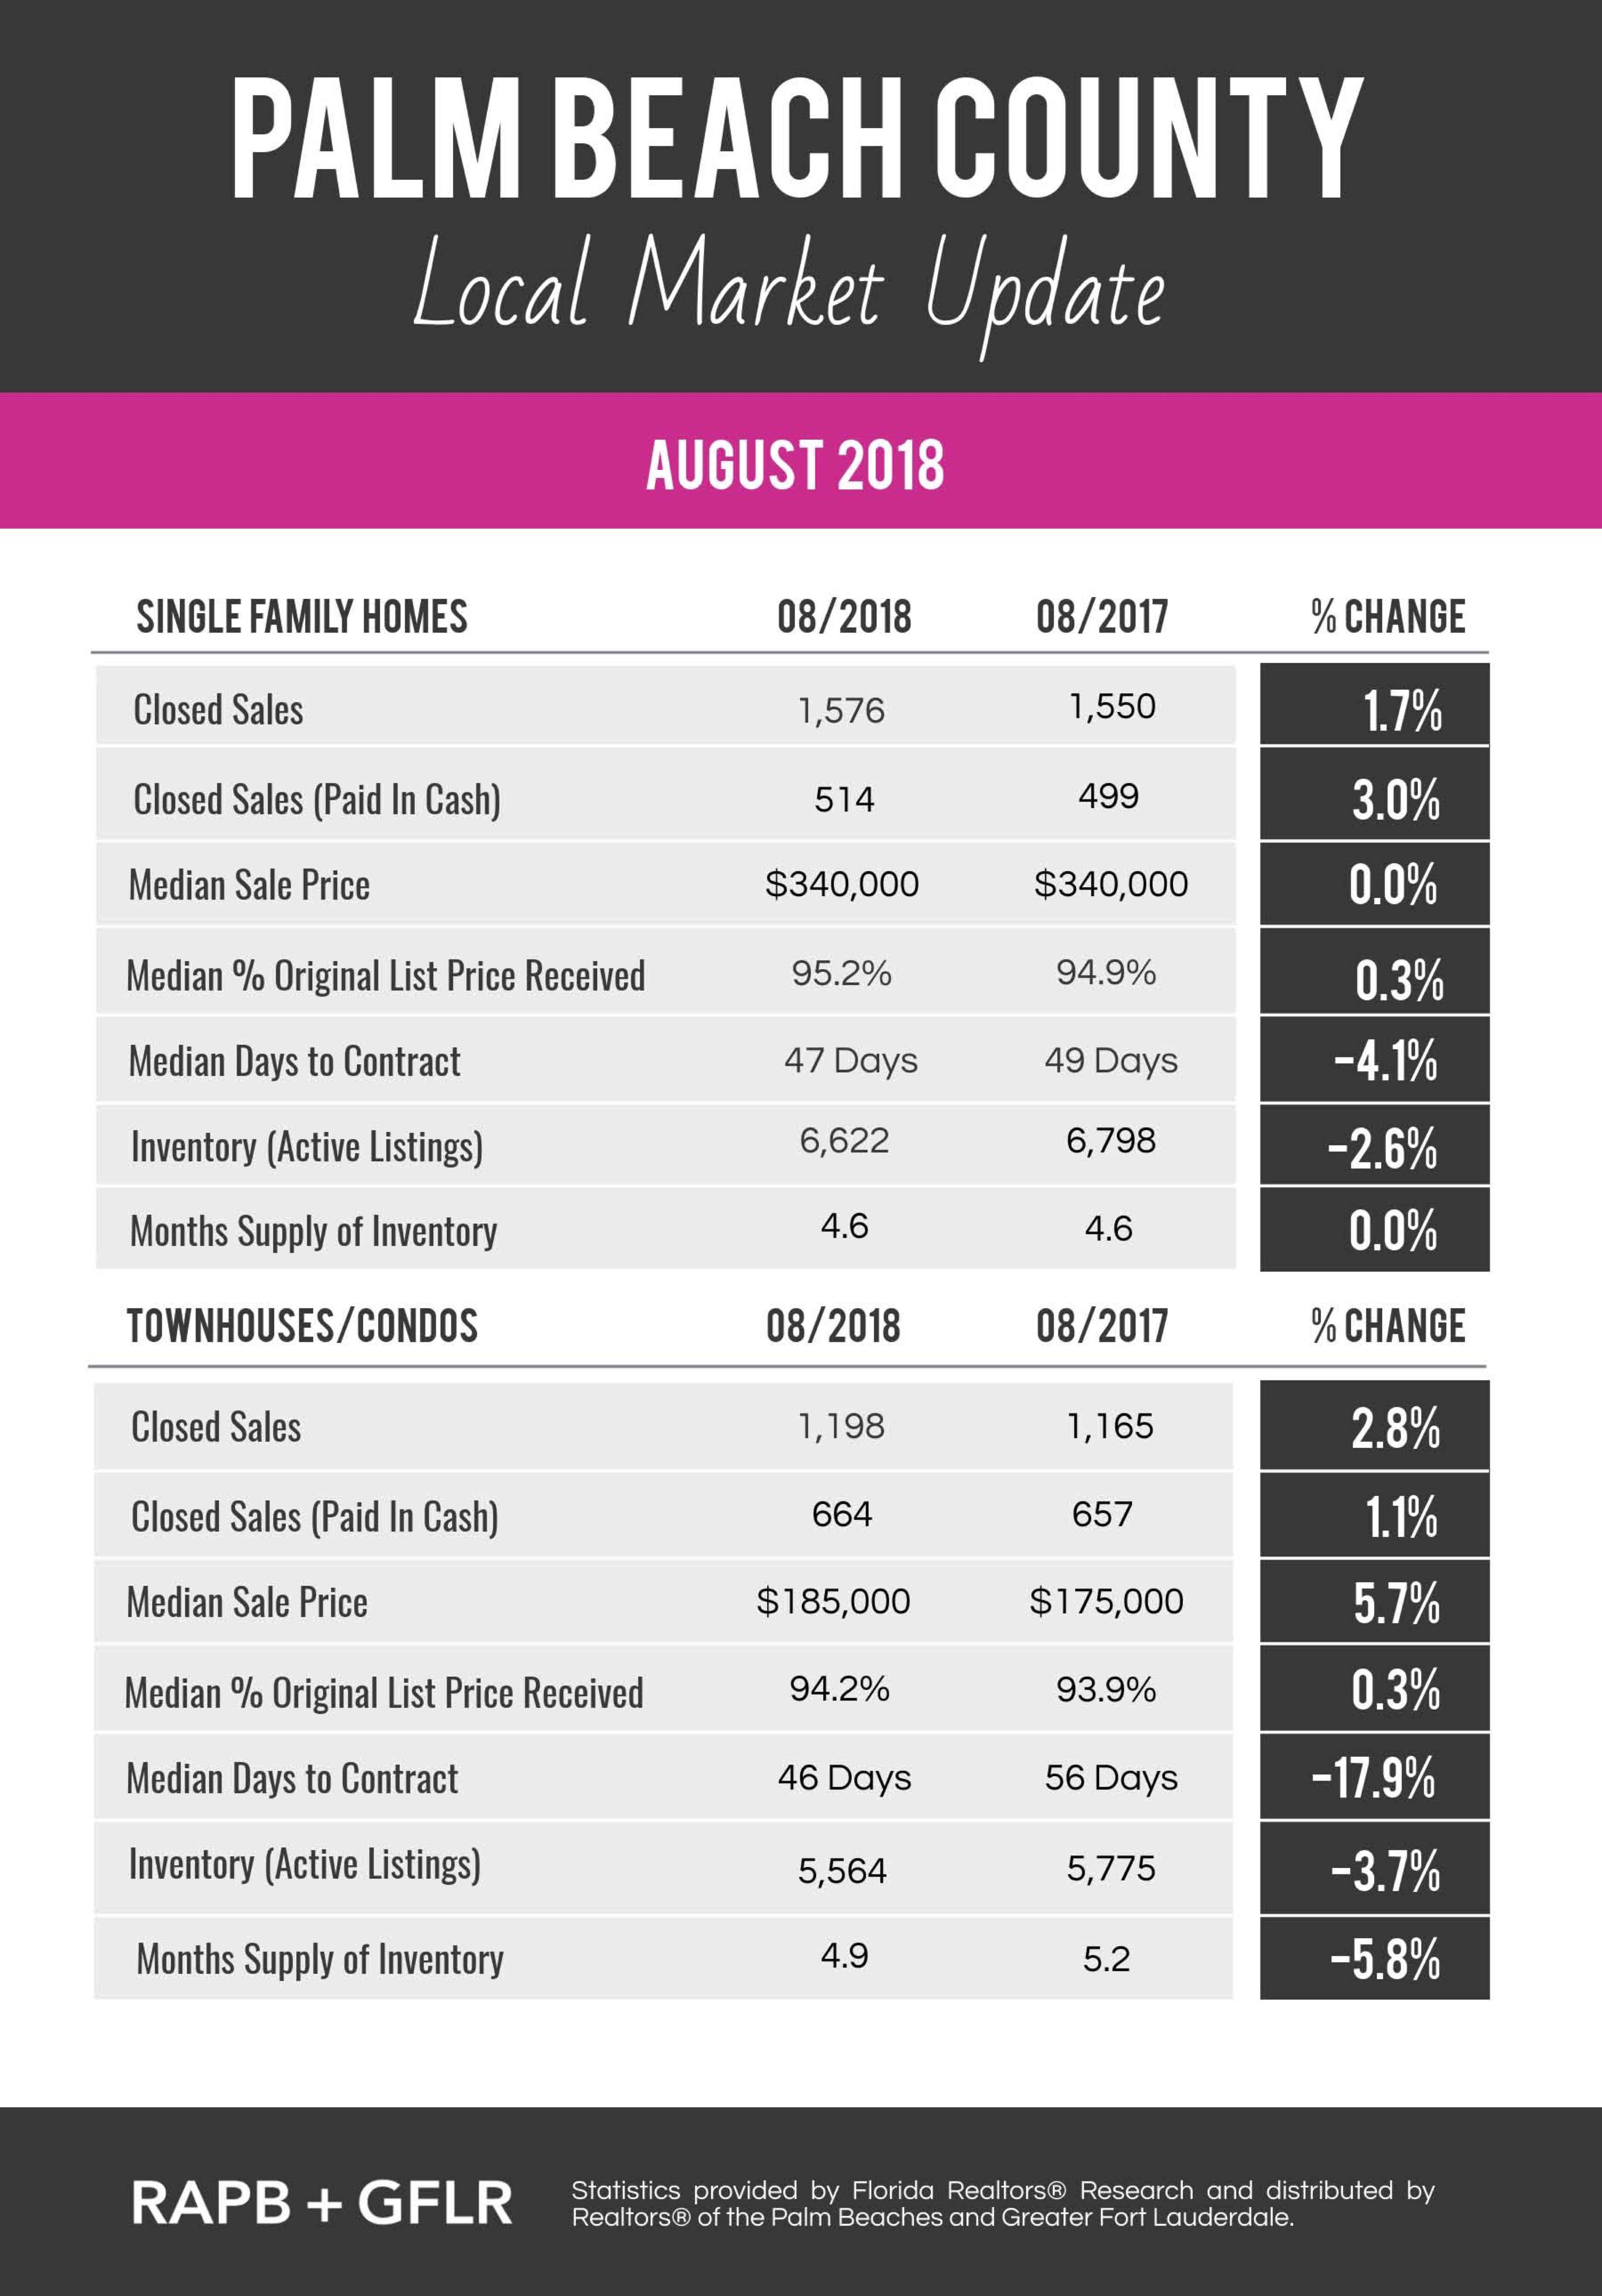 Palm Beach County, FL Local Real Estate Market Update: August 2018